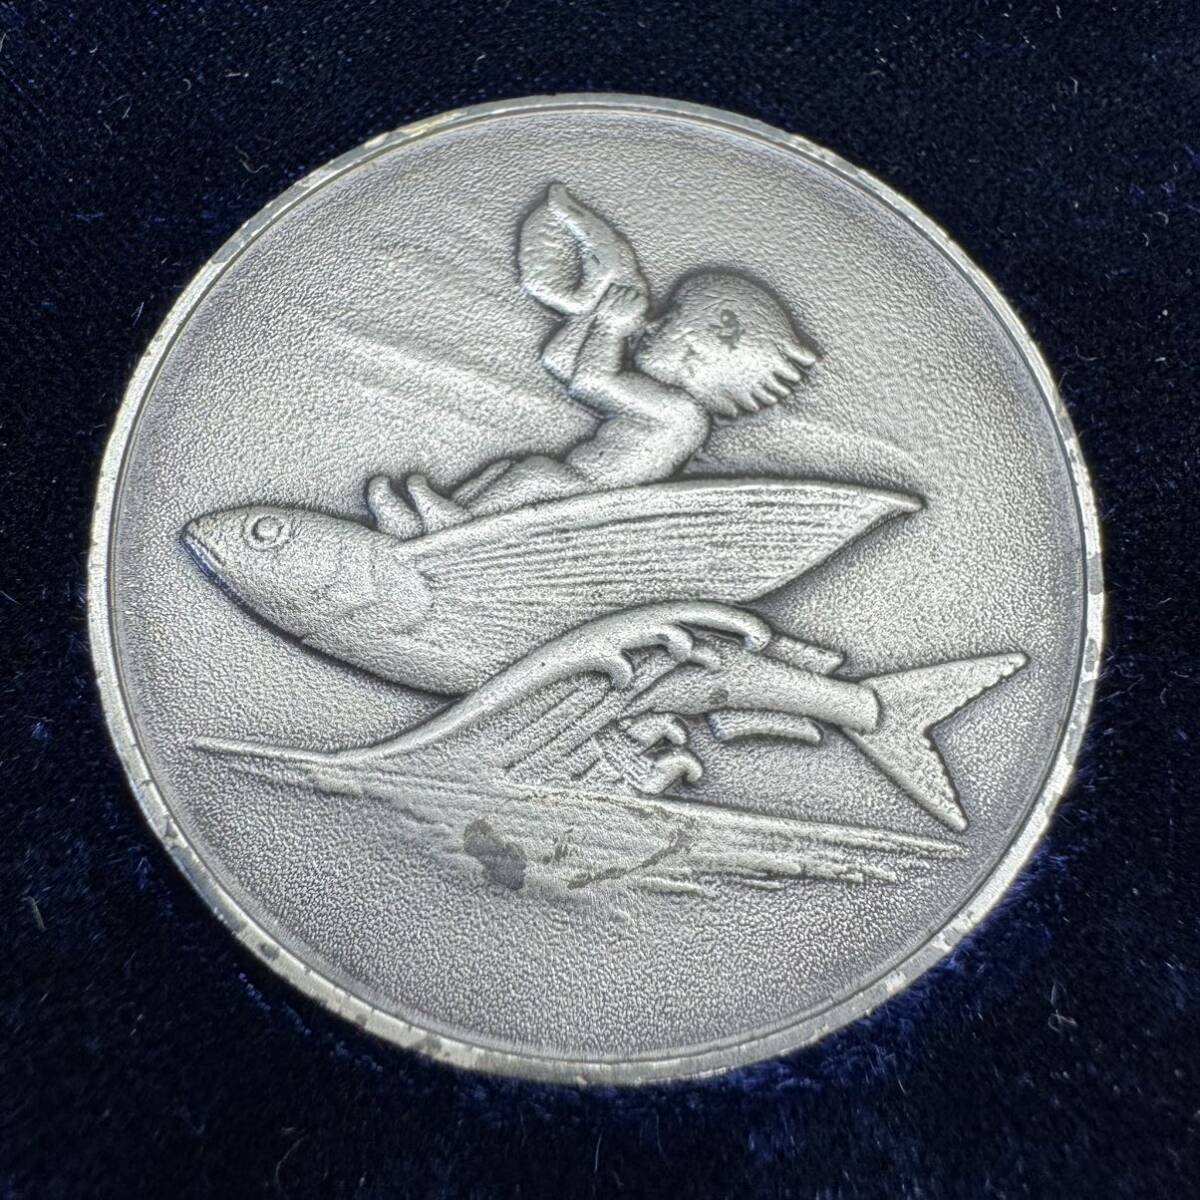  Okinawa international sea .. viewing . memory medal flying uo. fish silver copper coin medal case attaching set 